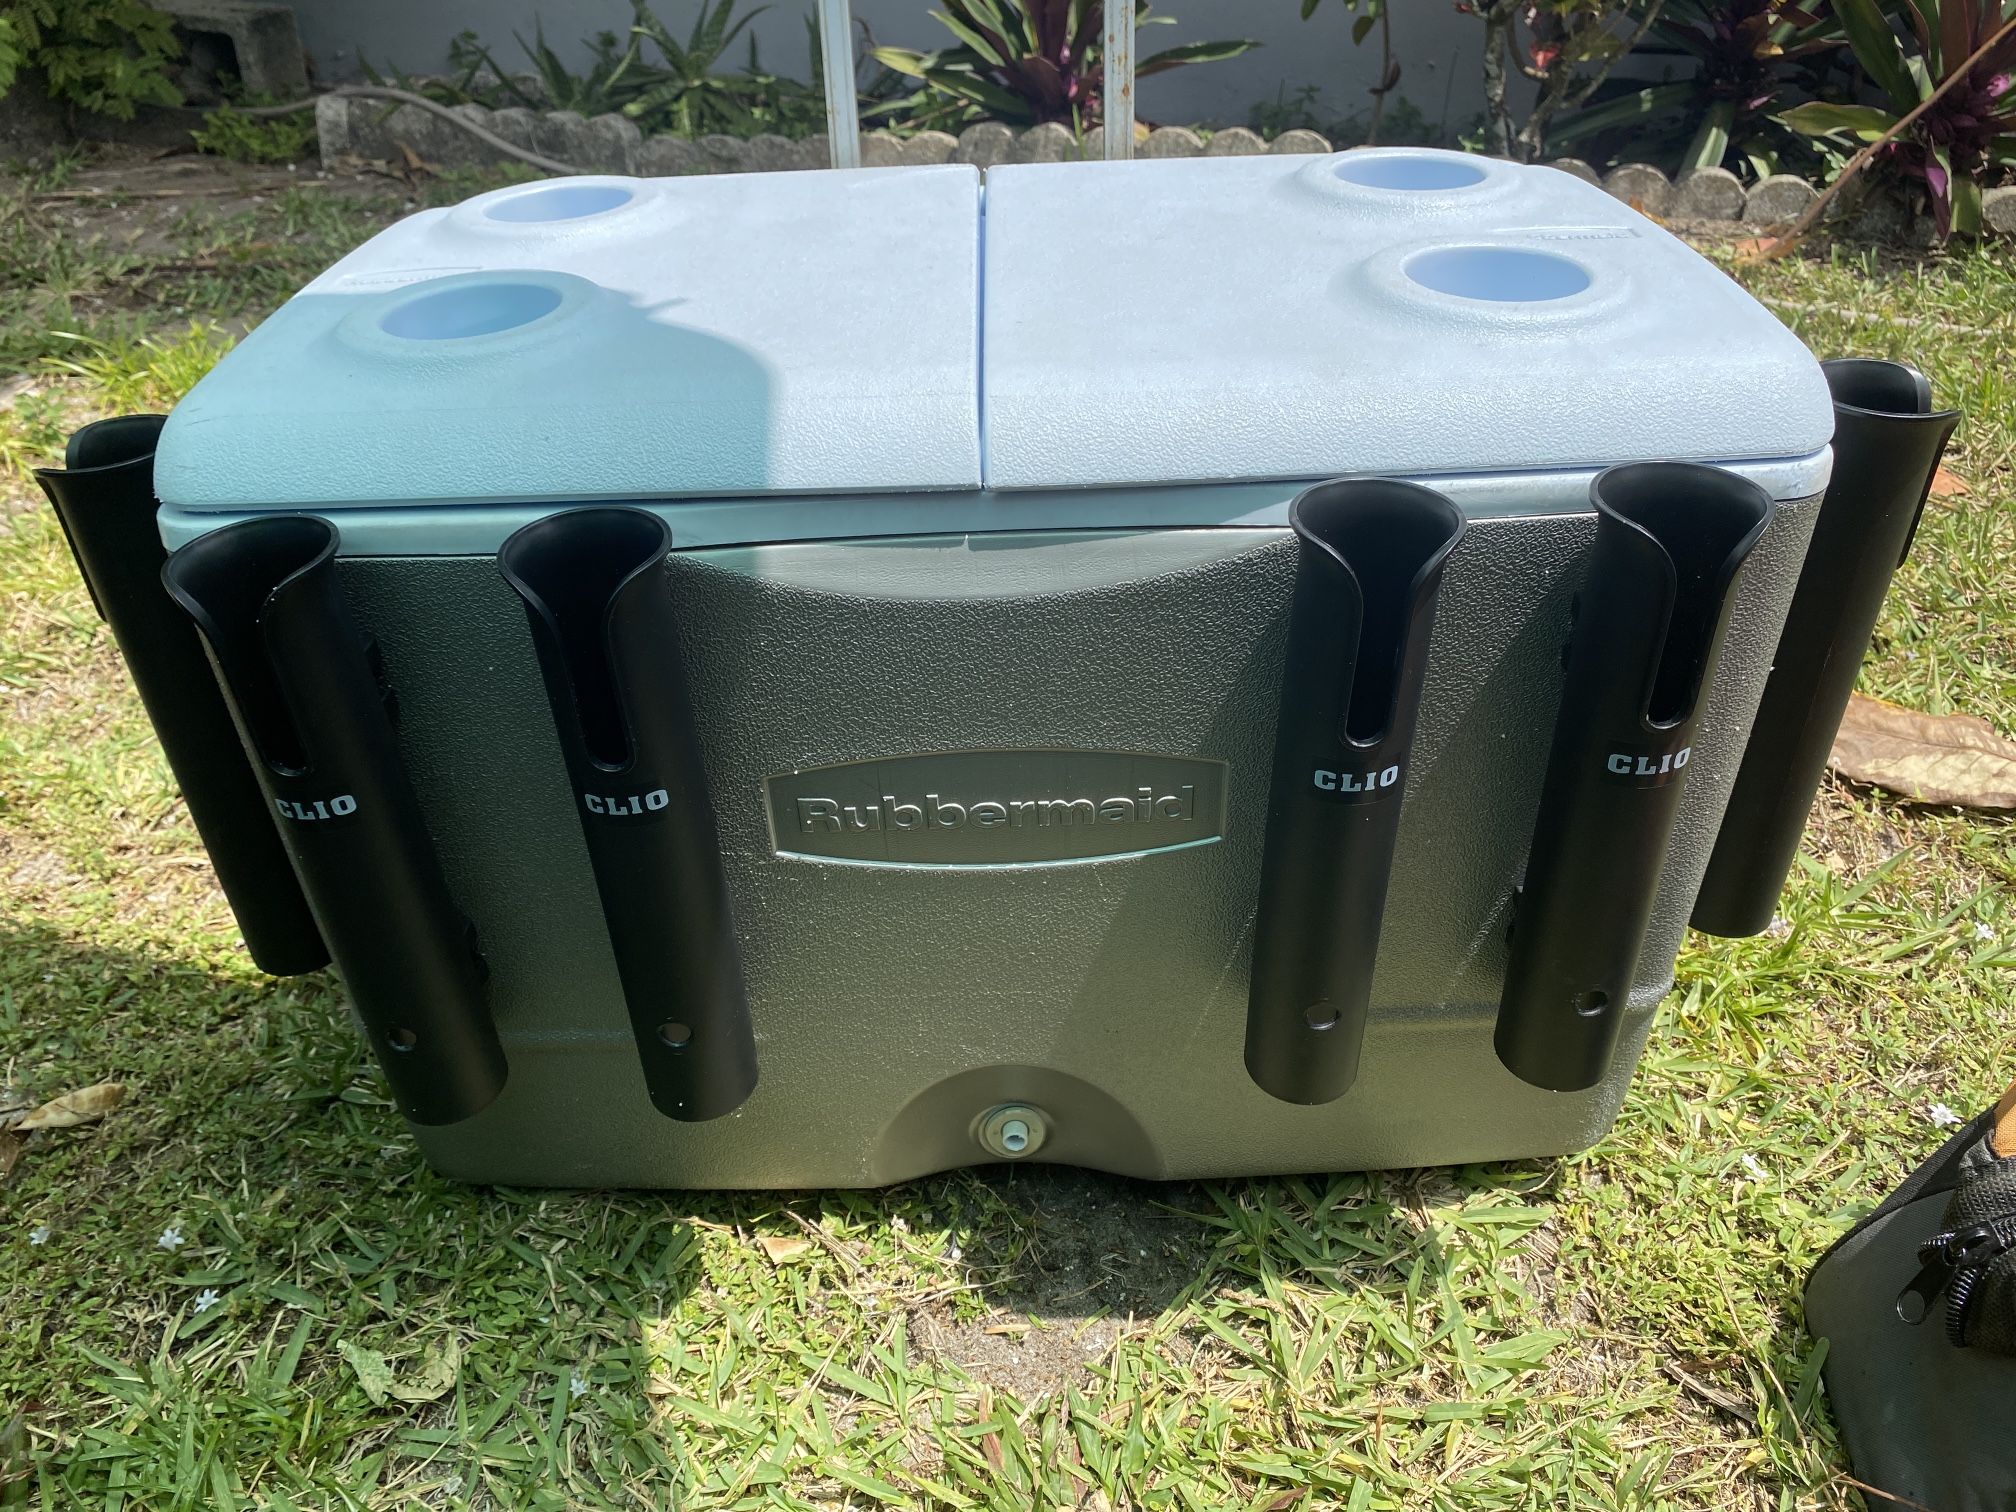 Rubbermaid Fishing Cooler With Rod Holders No Rods Included 